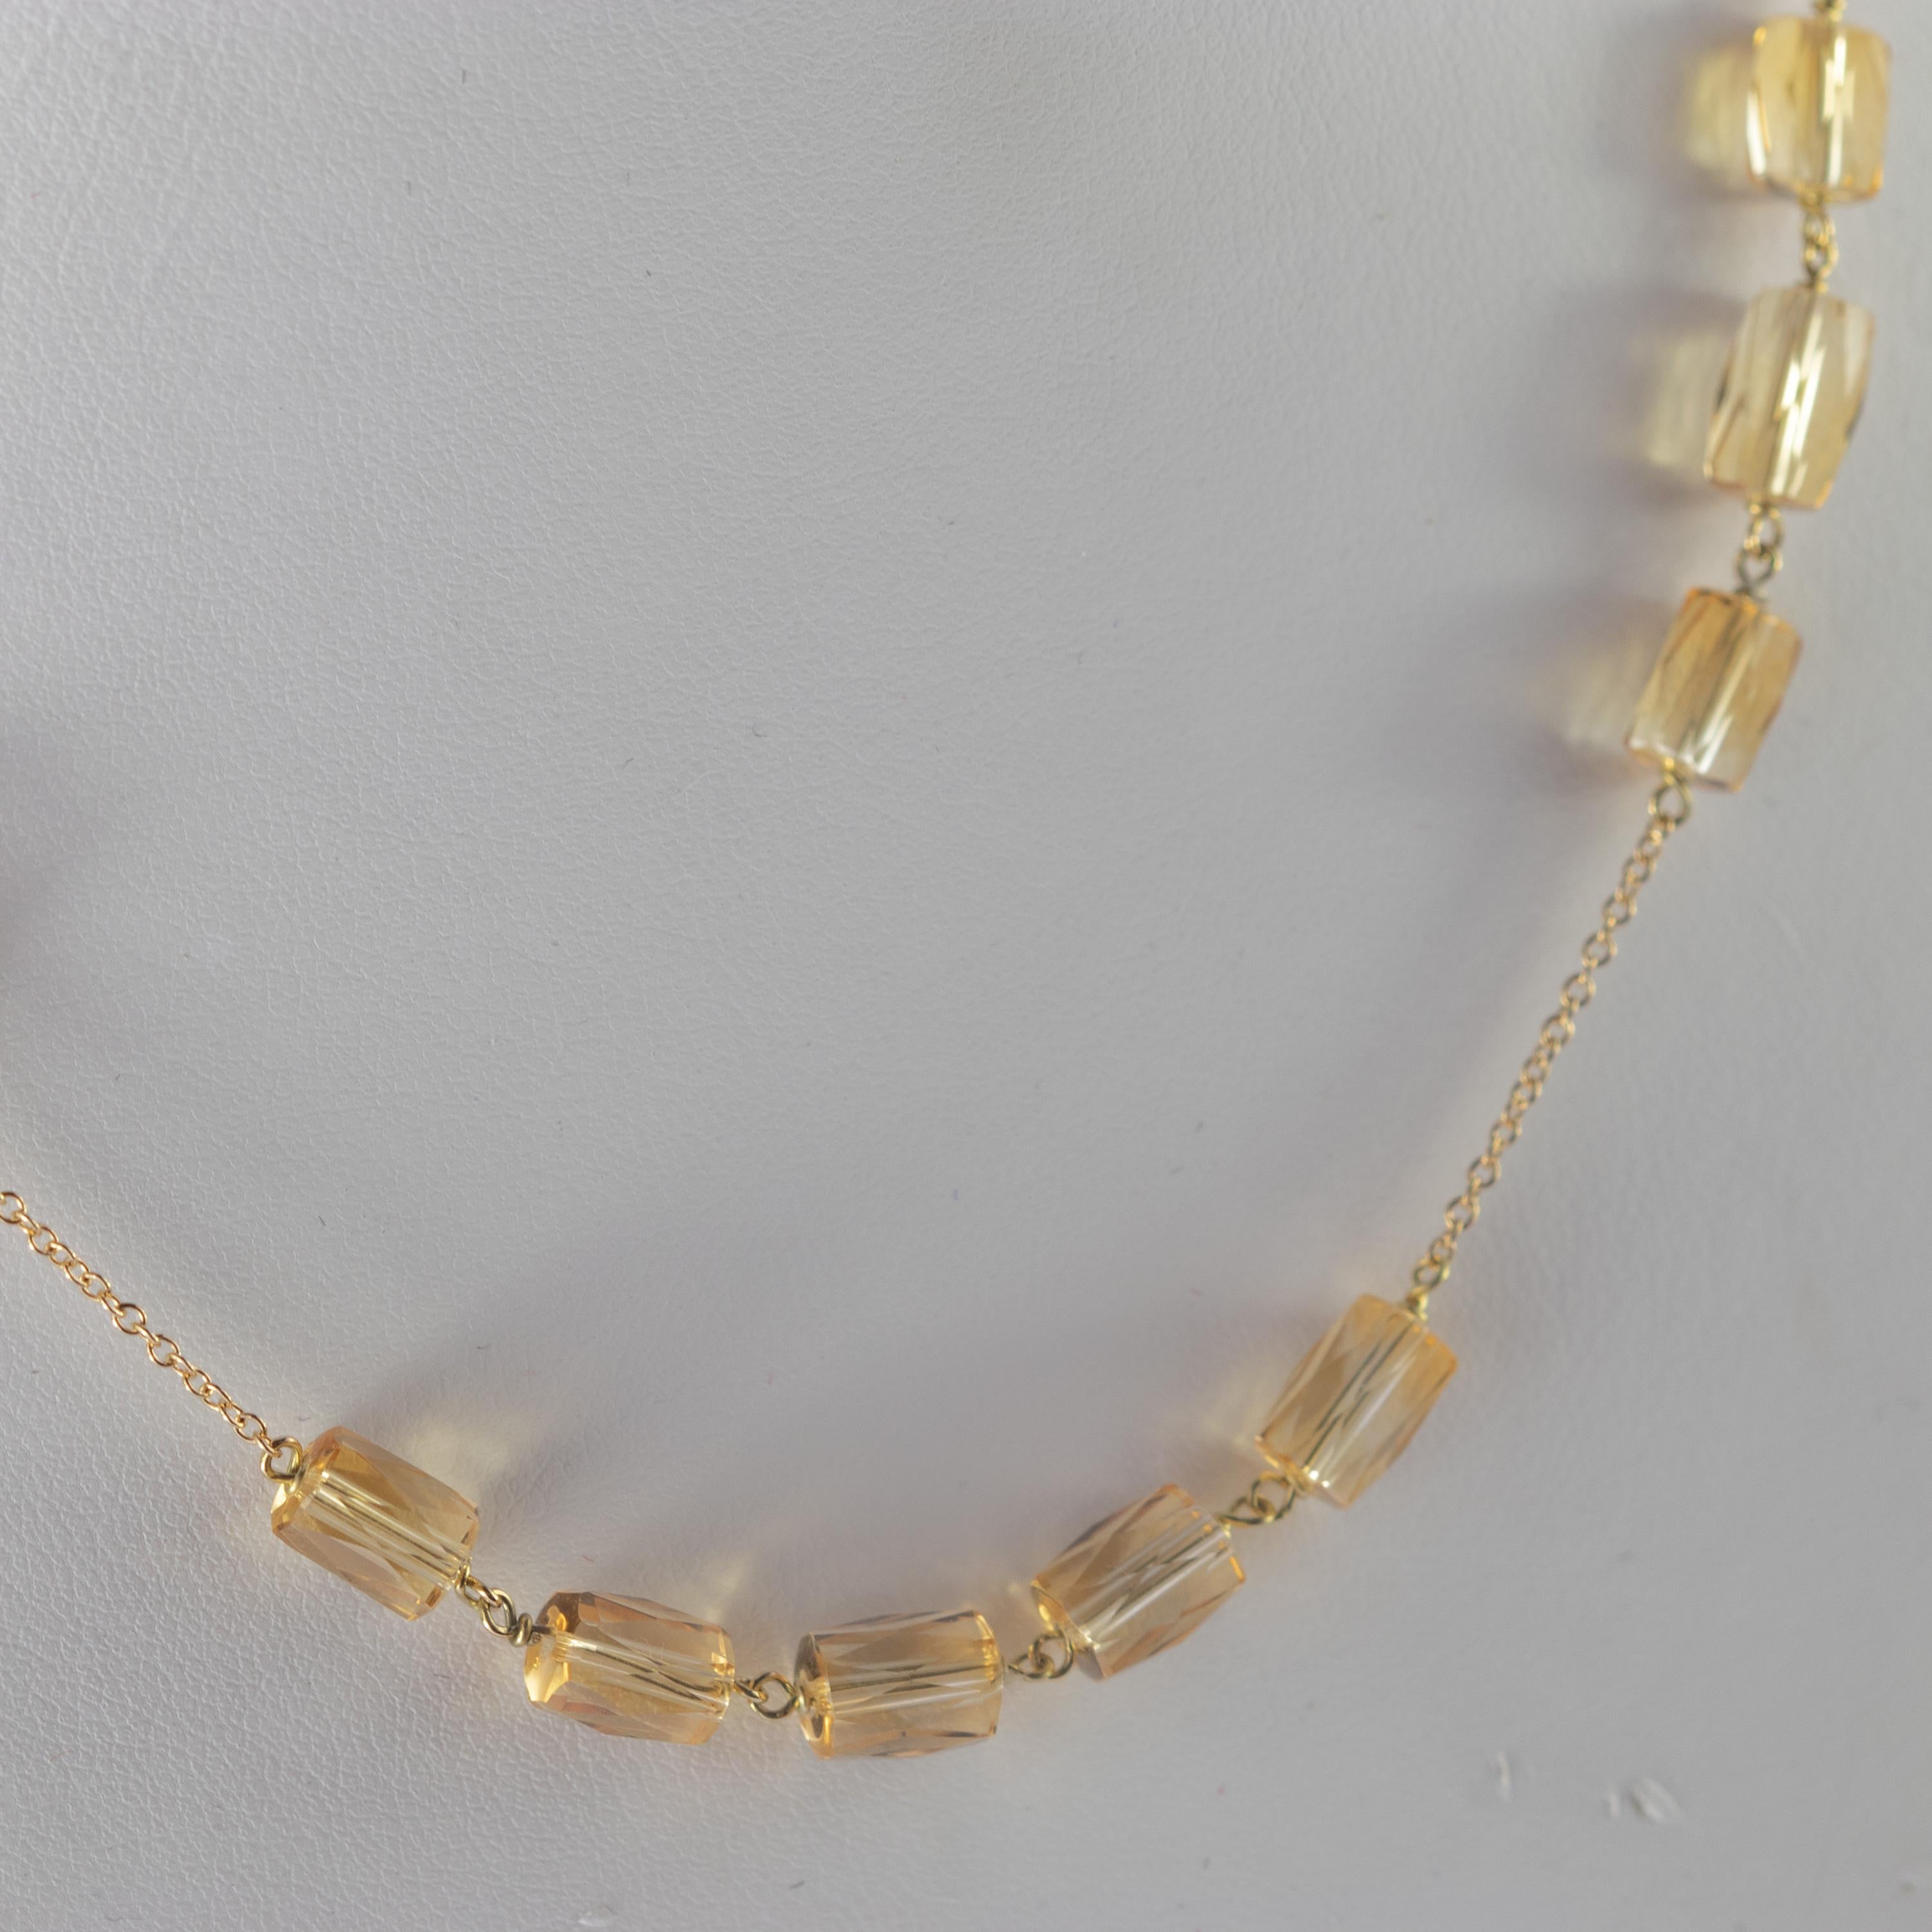 IIntini Jewels signature quality on a modern and contemporary design jewel.

Thirteen gems of top quality pure citrine quartz embellish a delicate 9 karat yellow gold chain necklace.
 
An elegant touch of glamour at your fingertips. Let yourself be